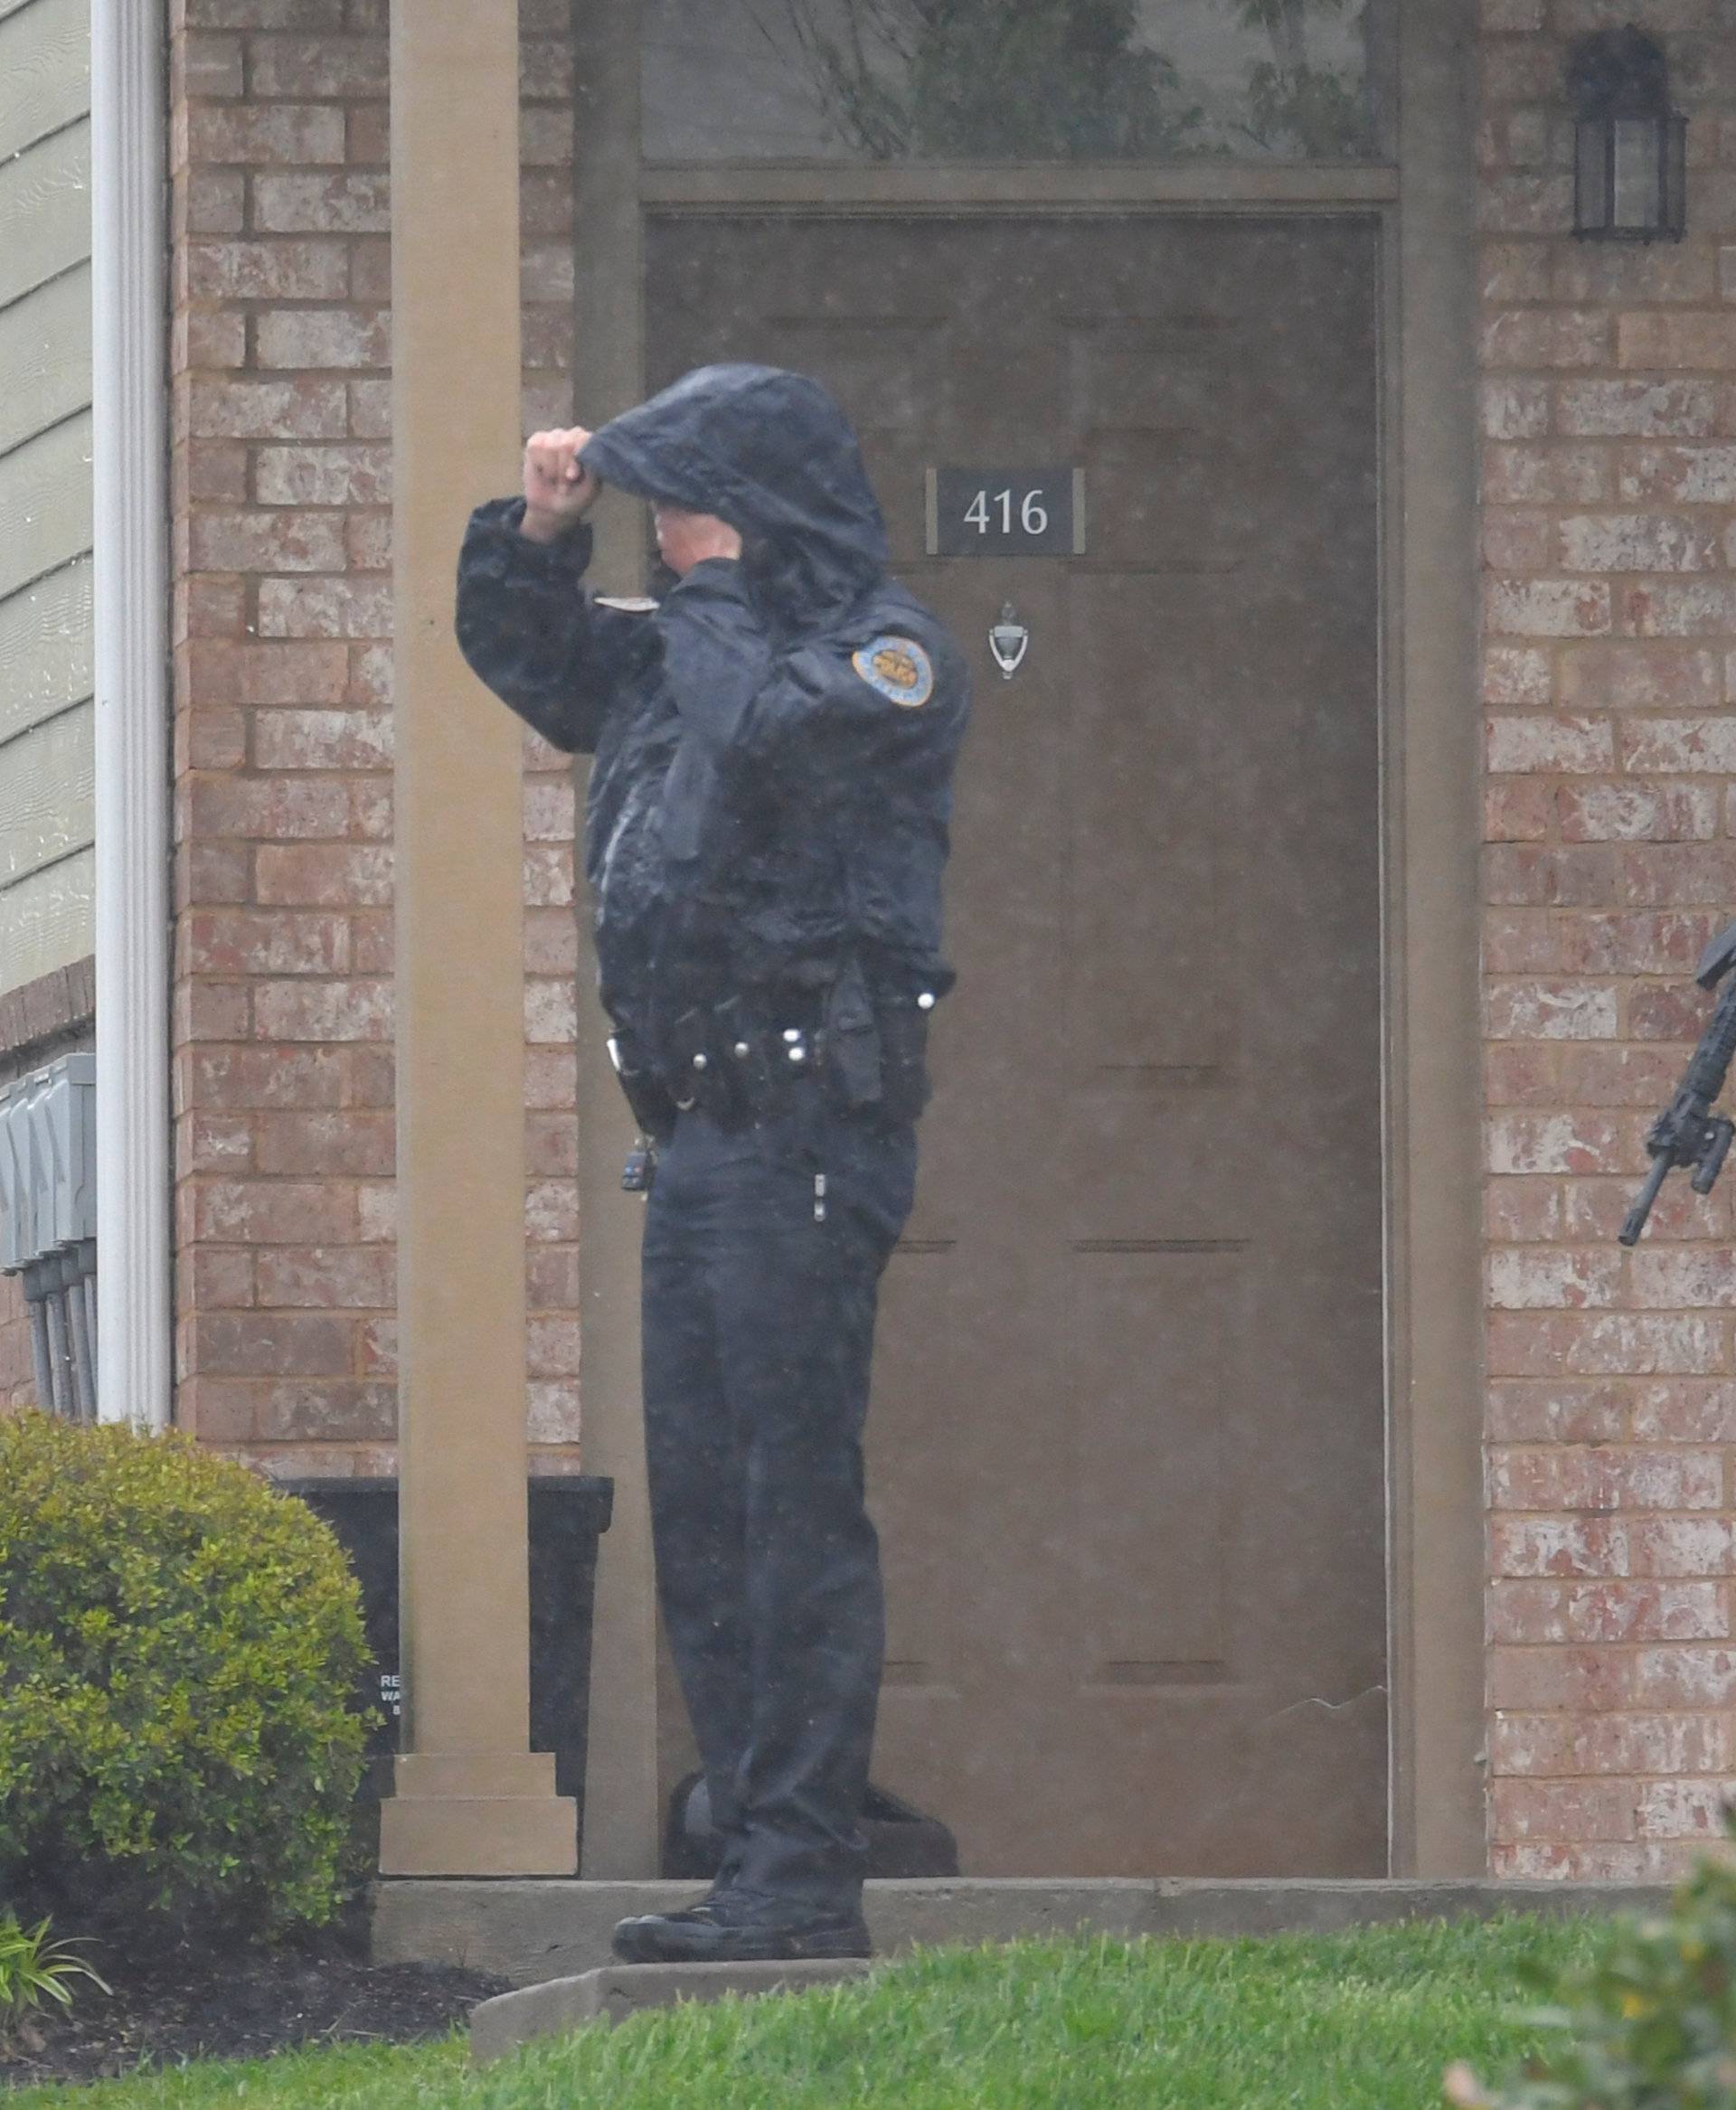 Metro Davidson County police search the apartment complex where Waffle House shooting suspect, Travis Reinking, reportedly lives near Nashville, Tennessee